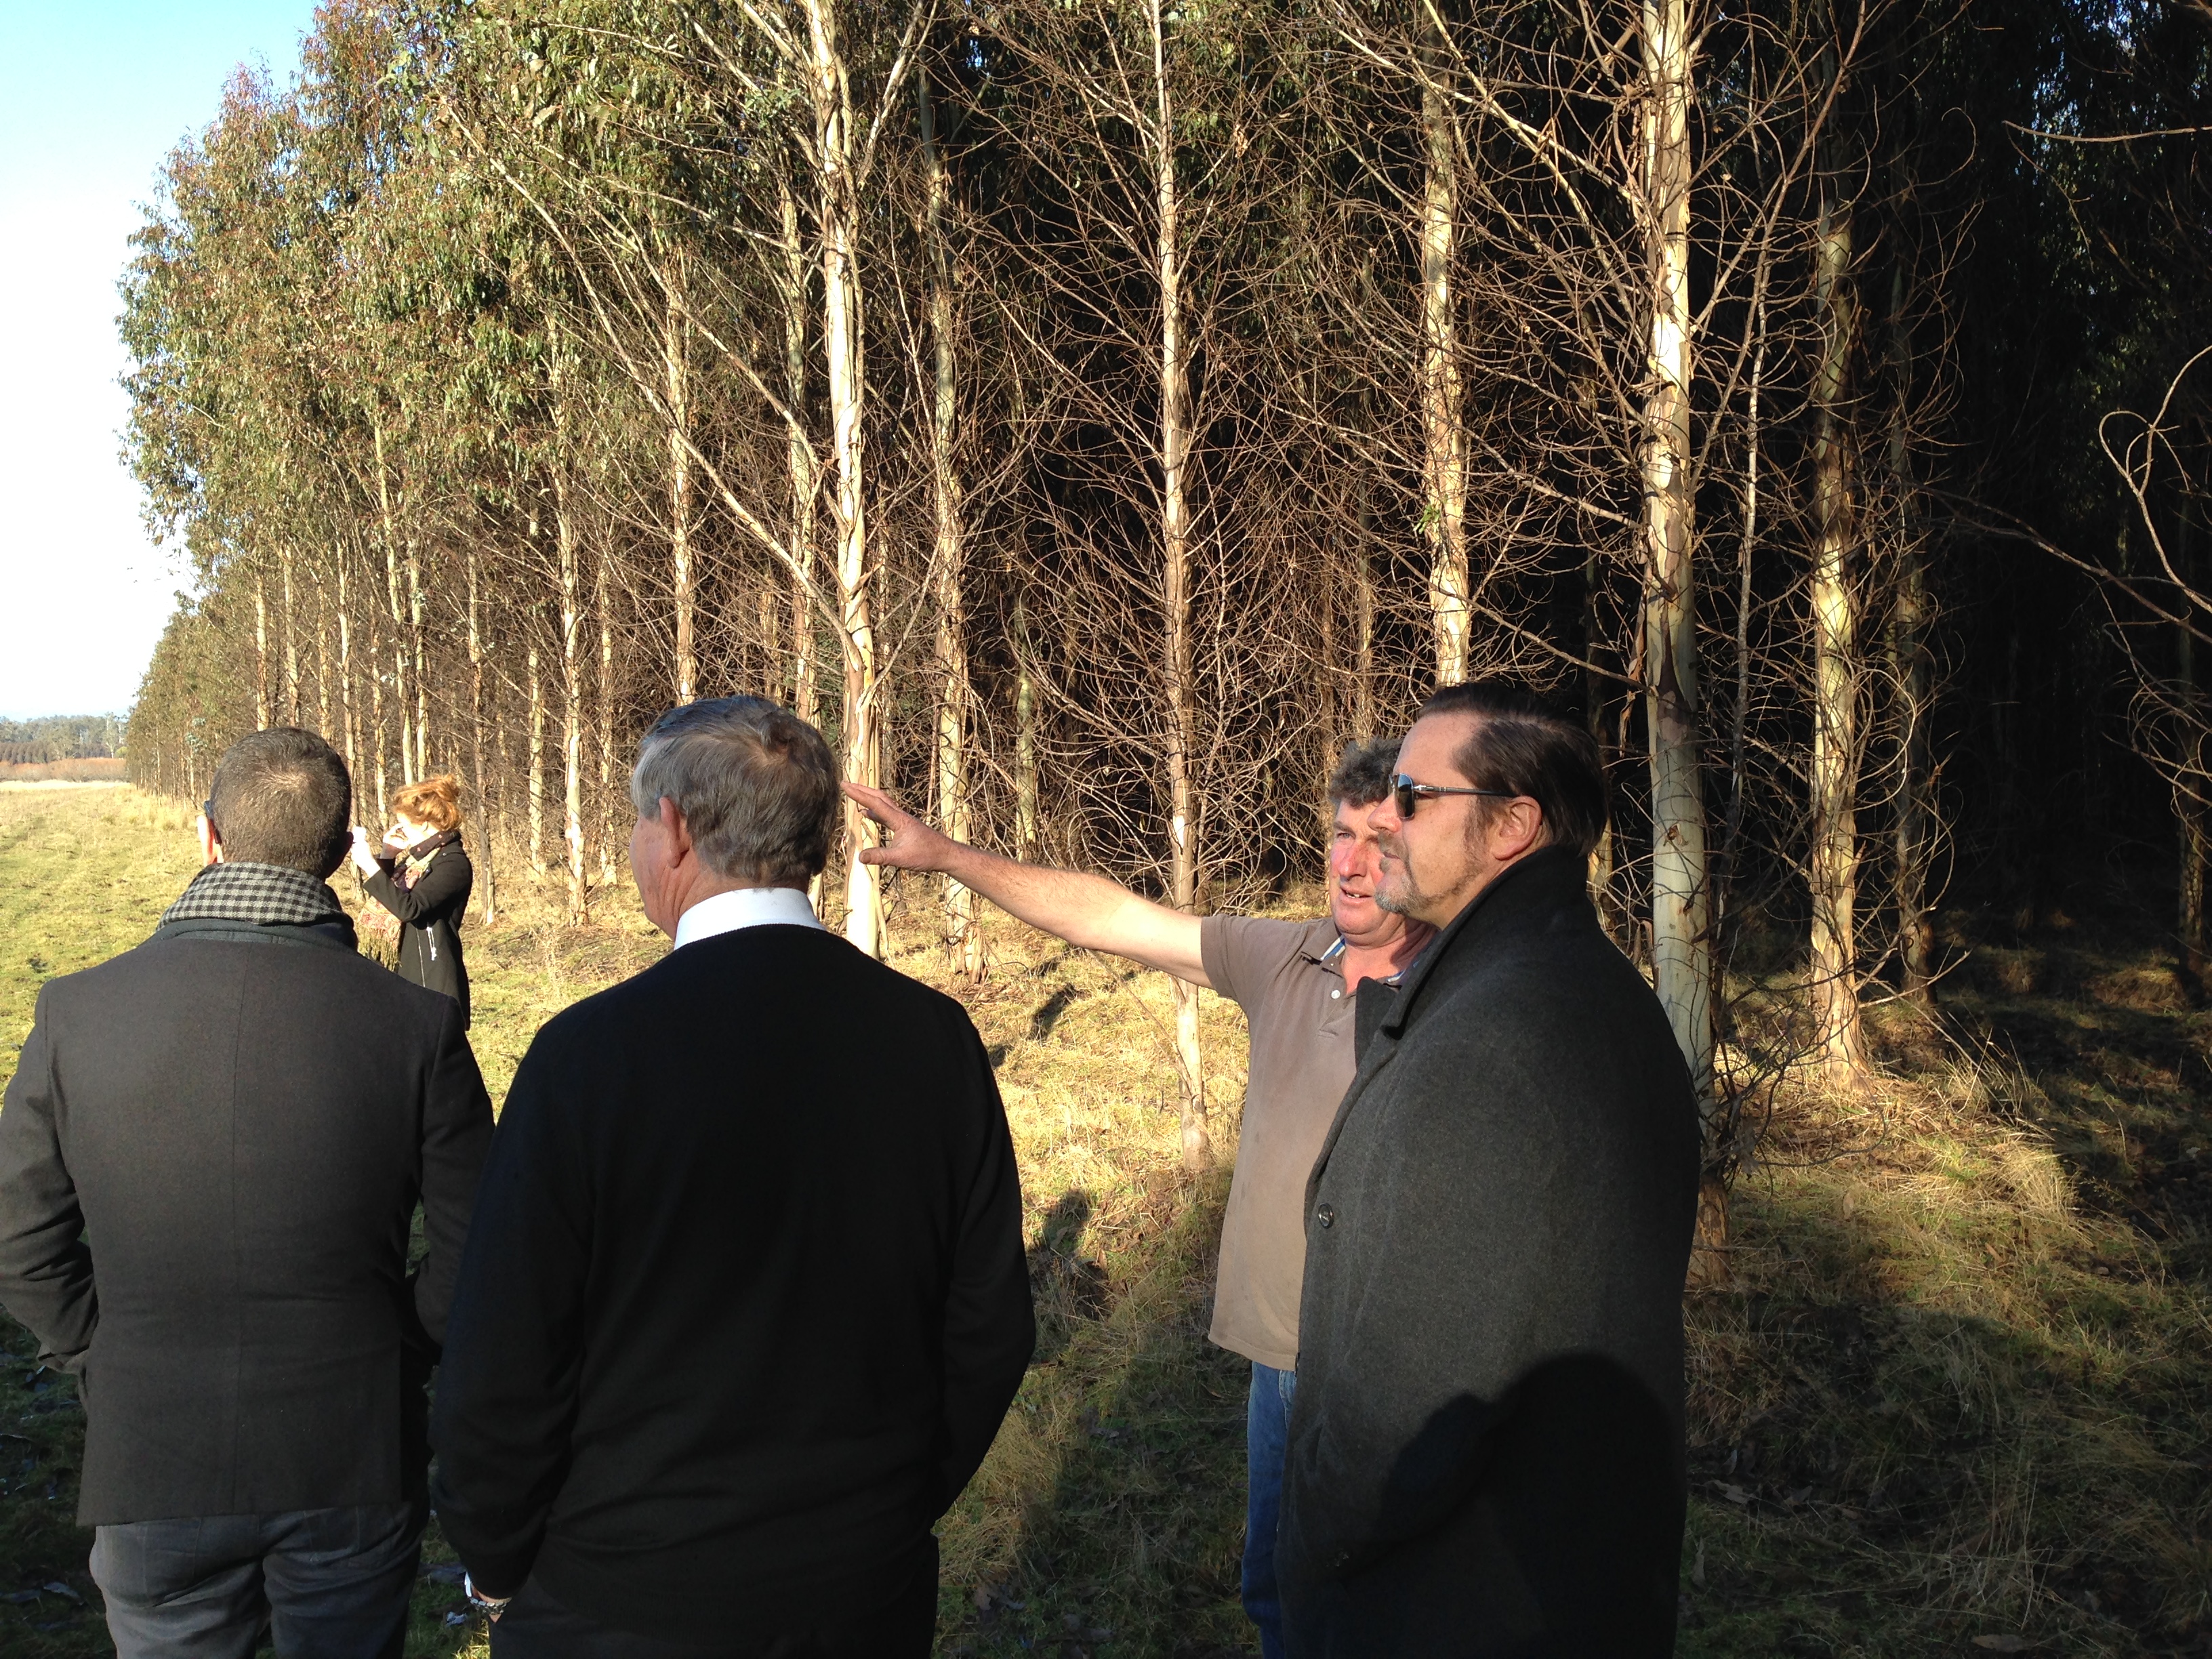 The committee visit to a plantation outside Launceston, Tas, 5 August 2015.